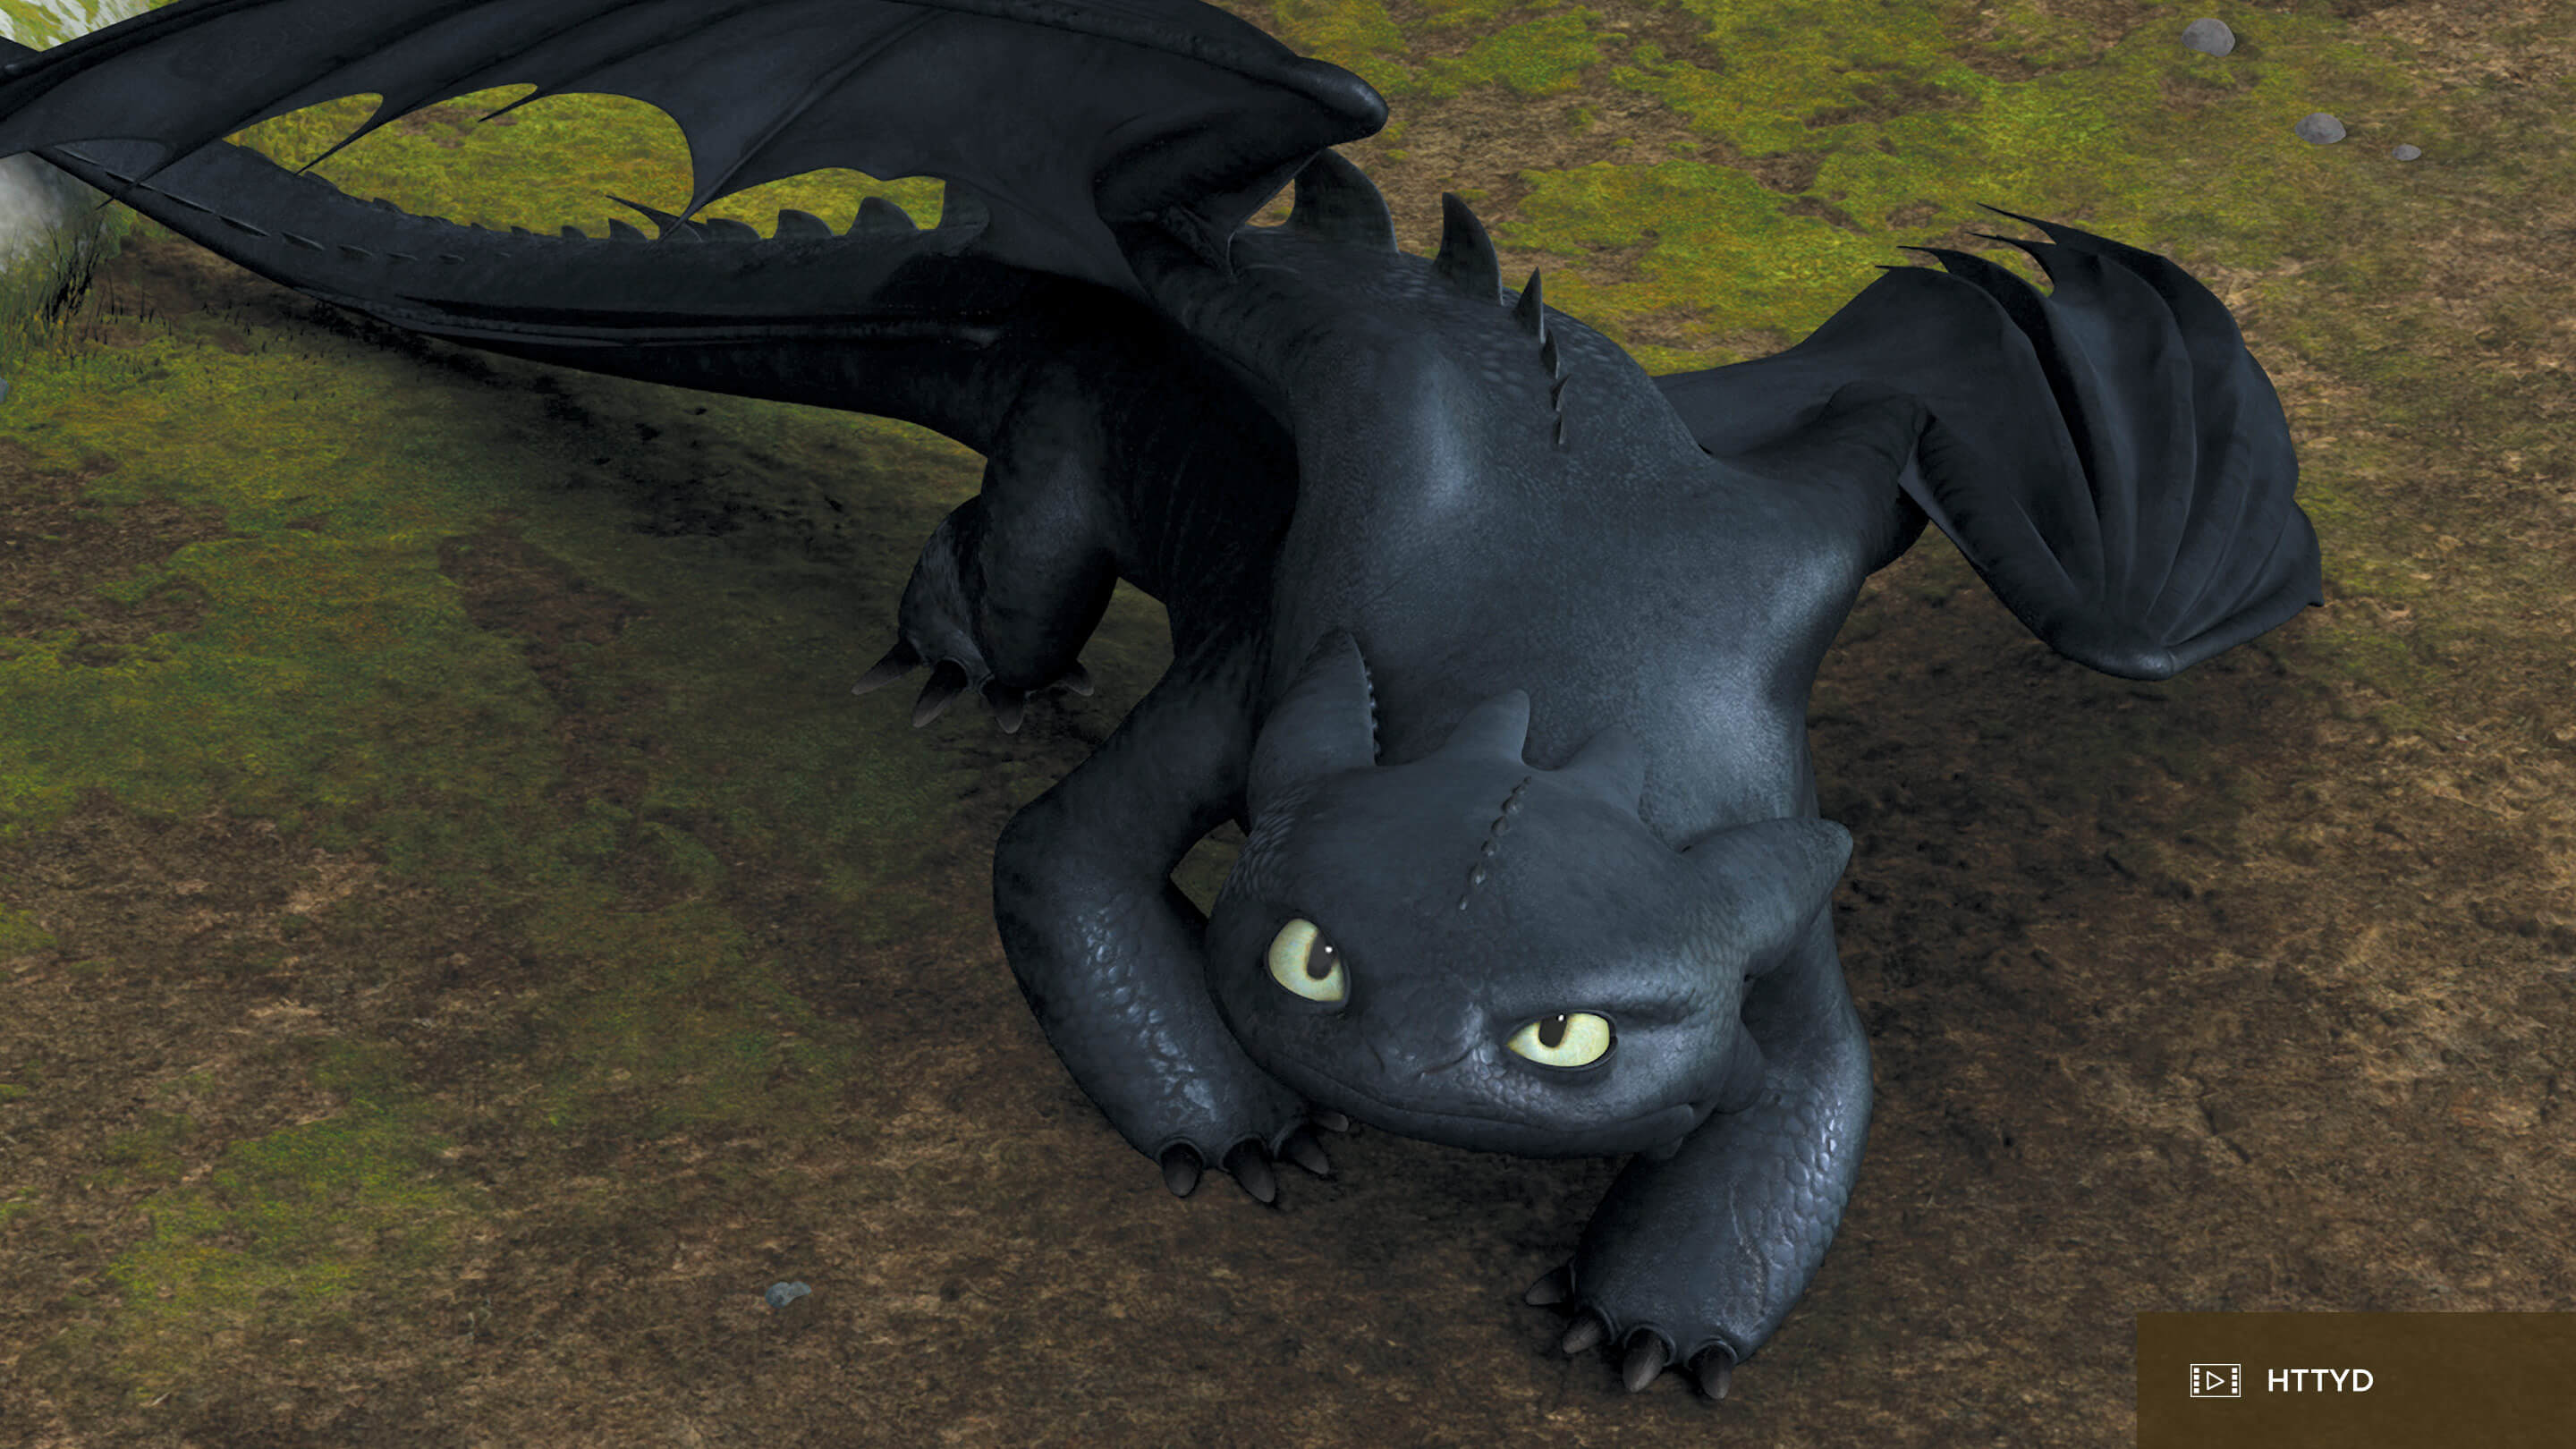 The name of this dragon from How to Train Your Dragon. 